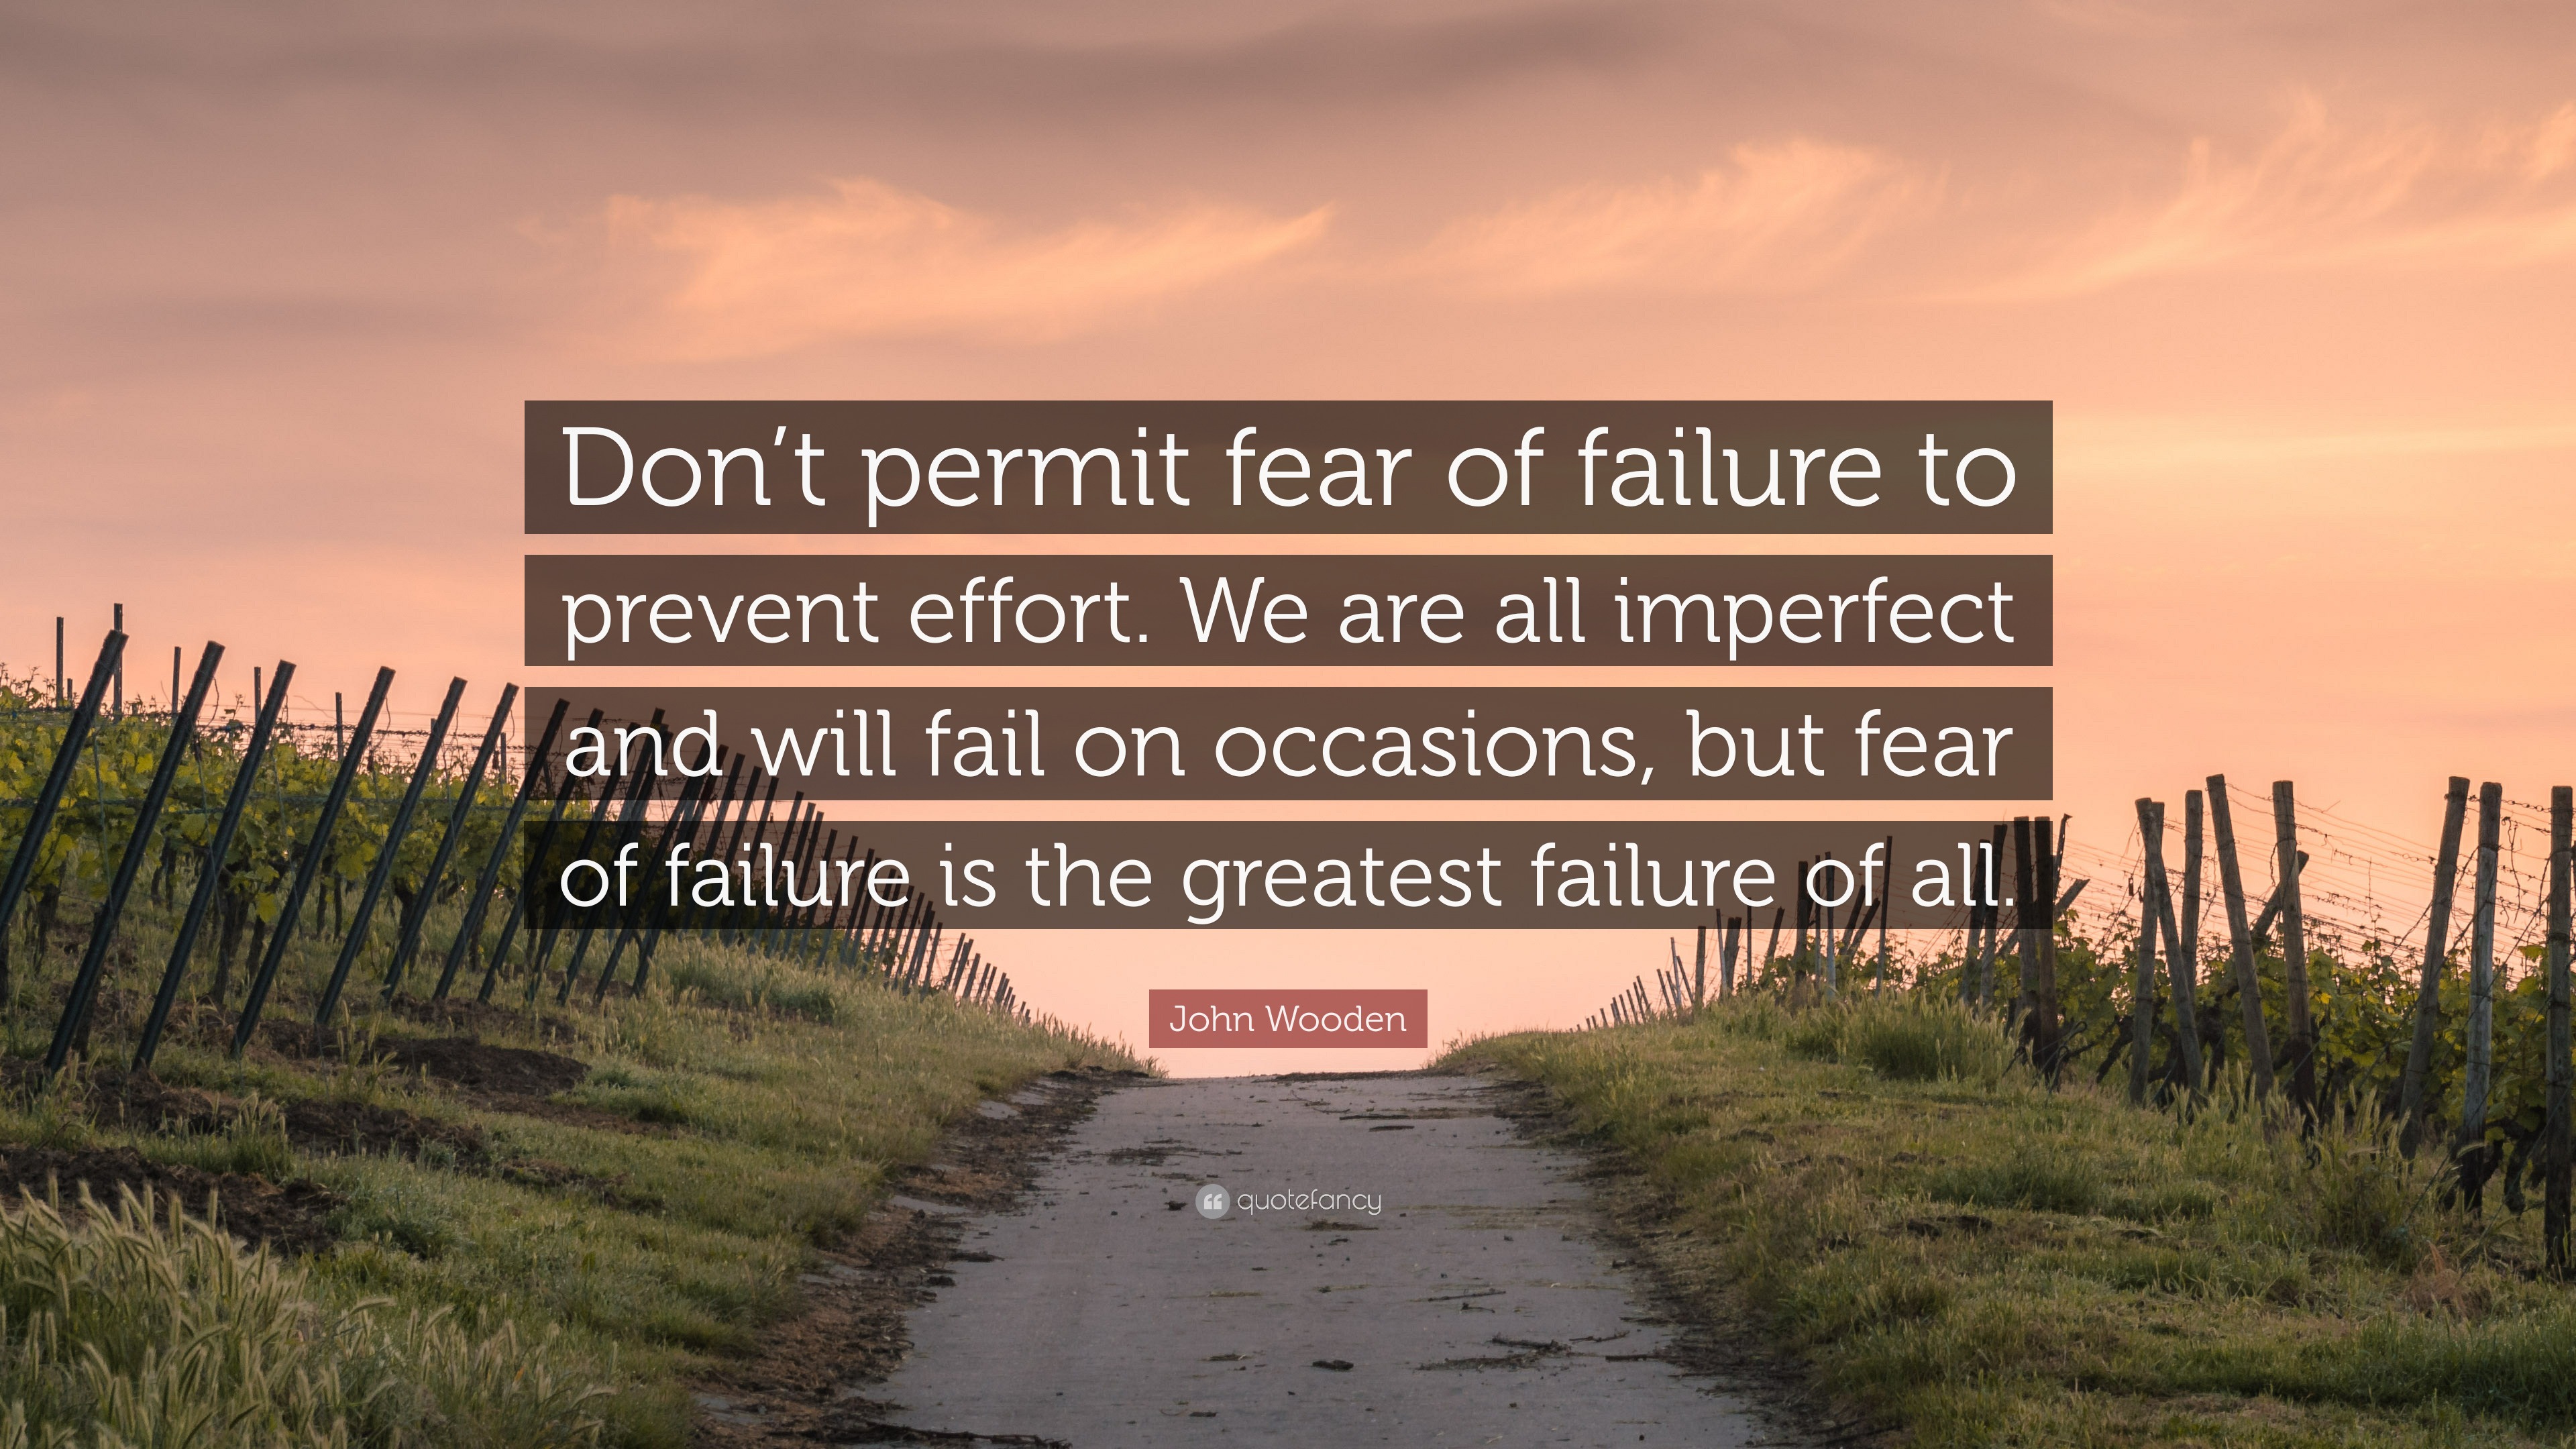 John Wooden Quote: “Don’t permit fear of failure to prevent effort. We